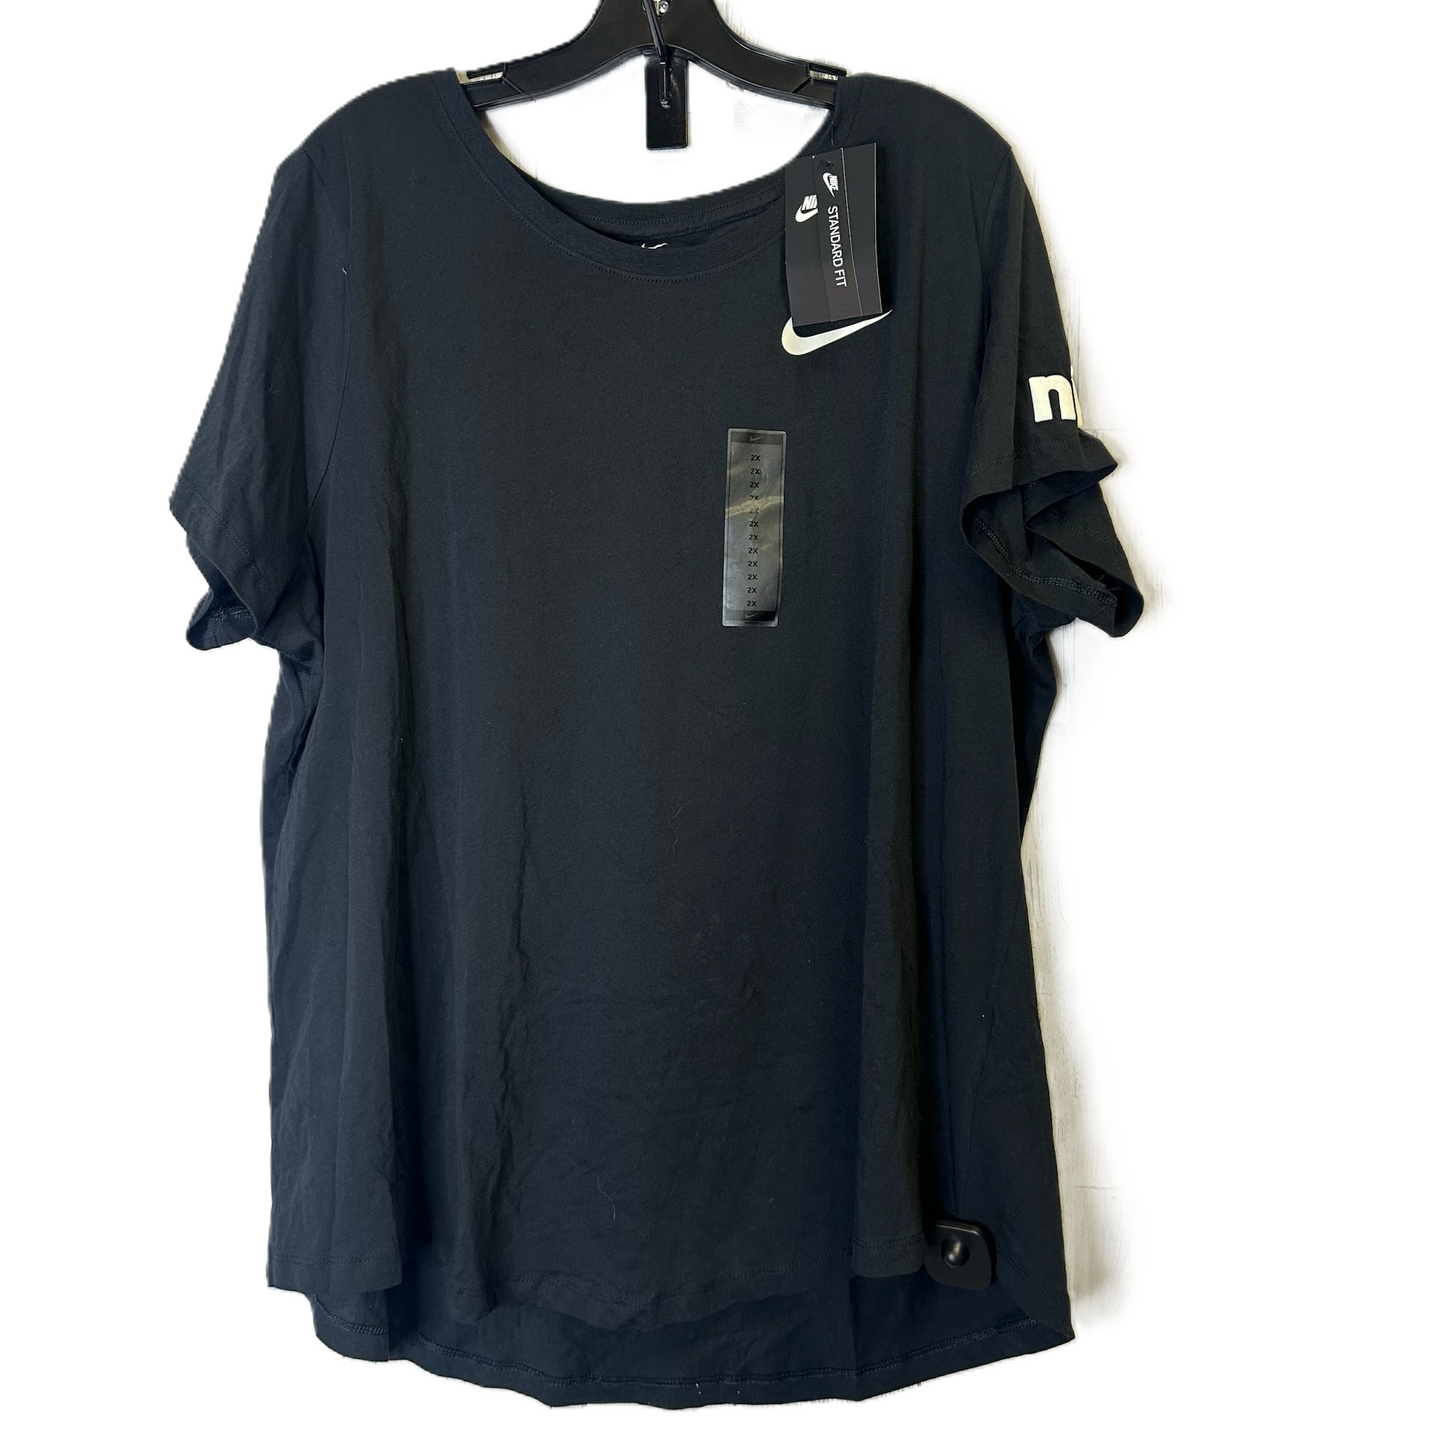 Black Athletic Top Short Sleeve By Nike, Size: 2x